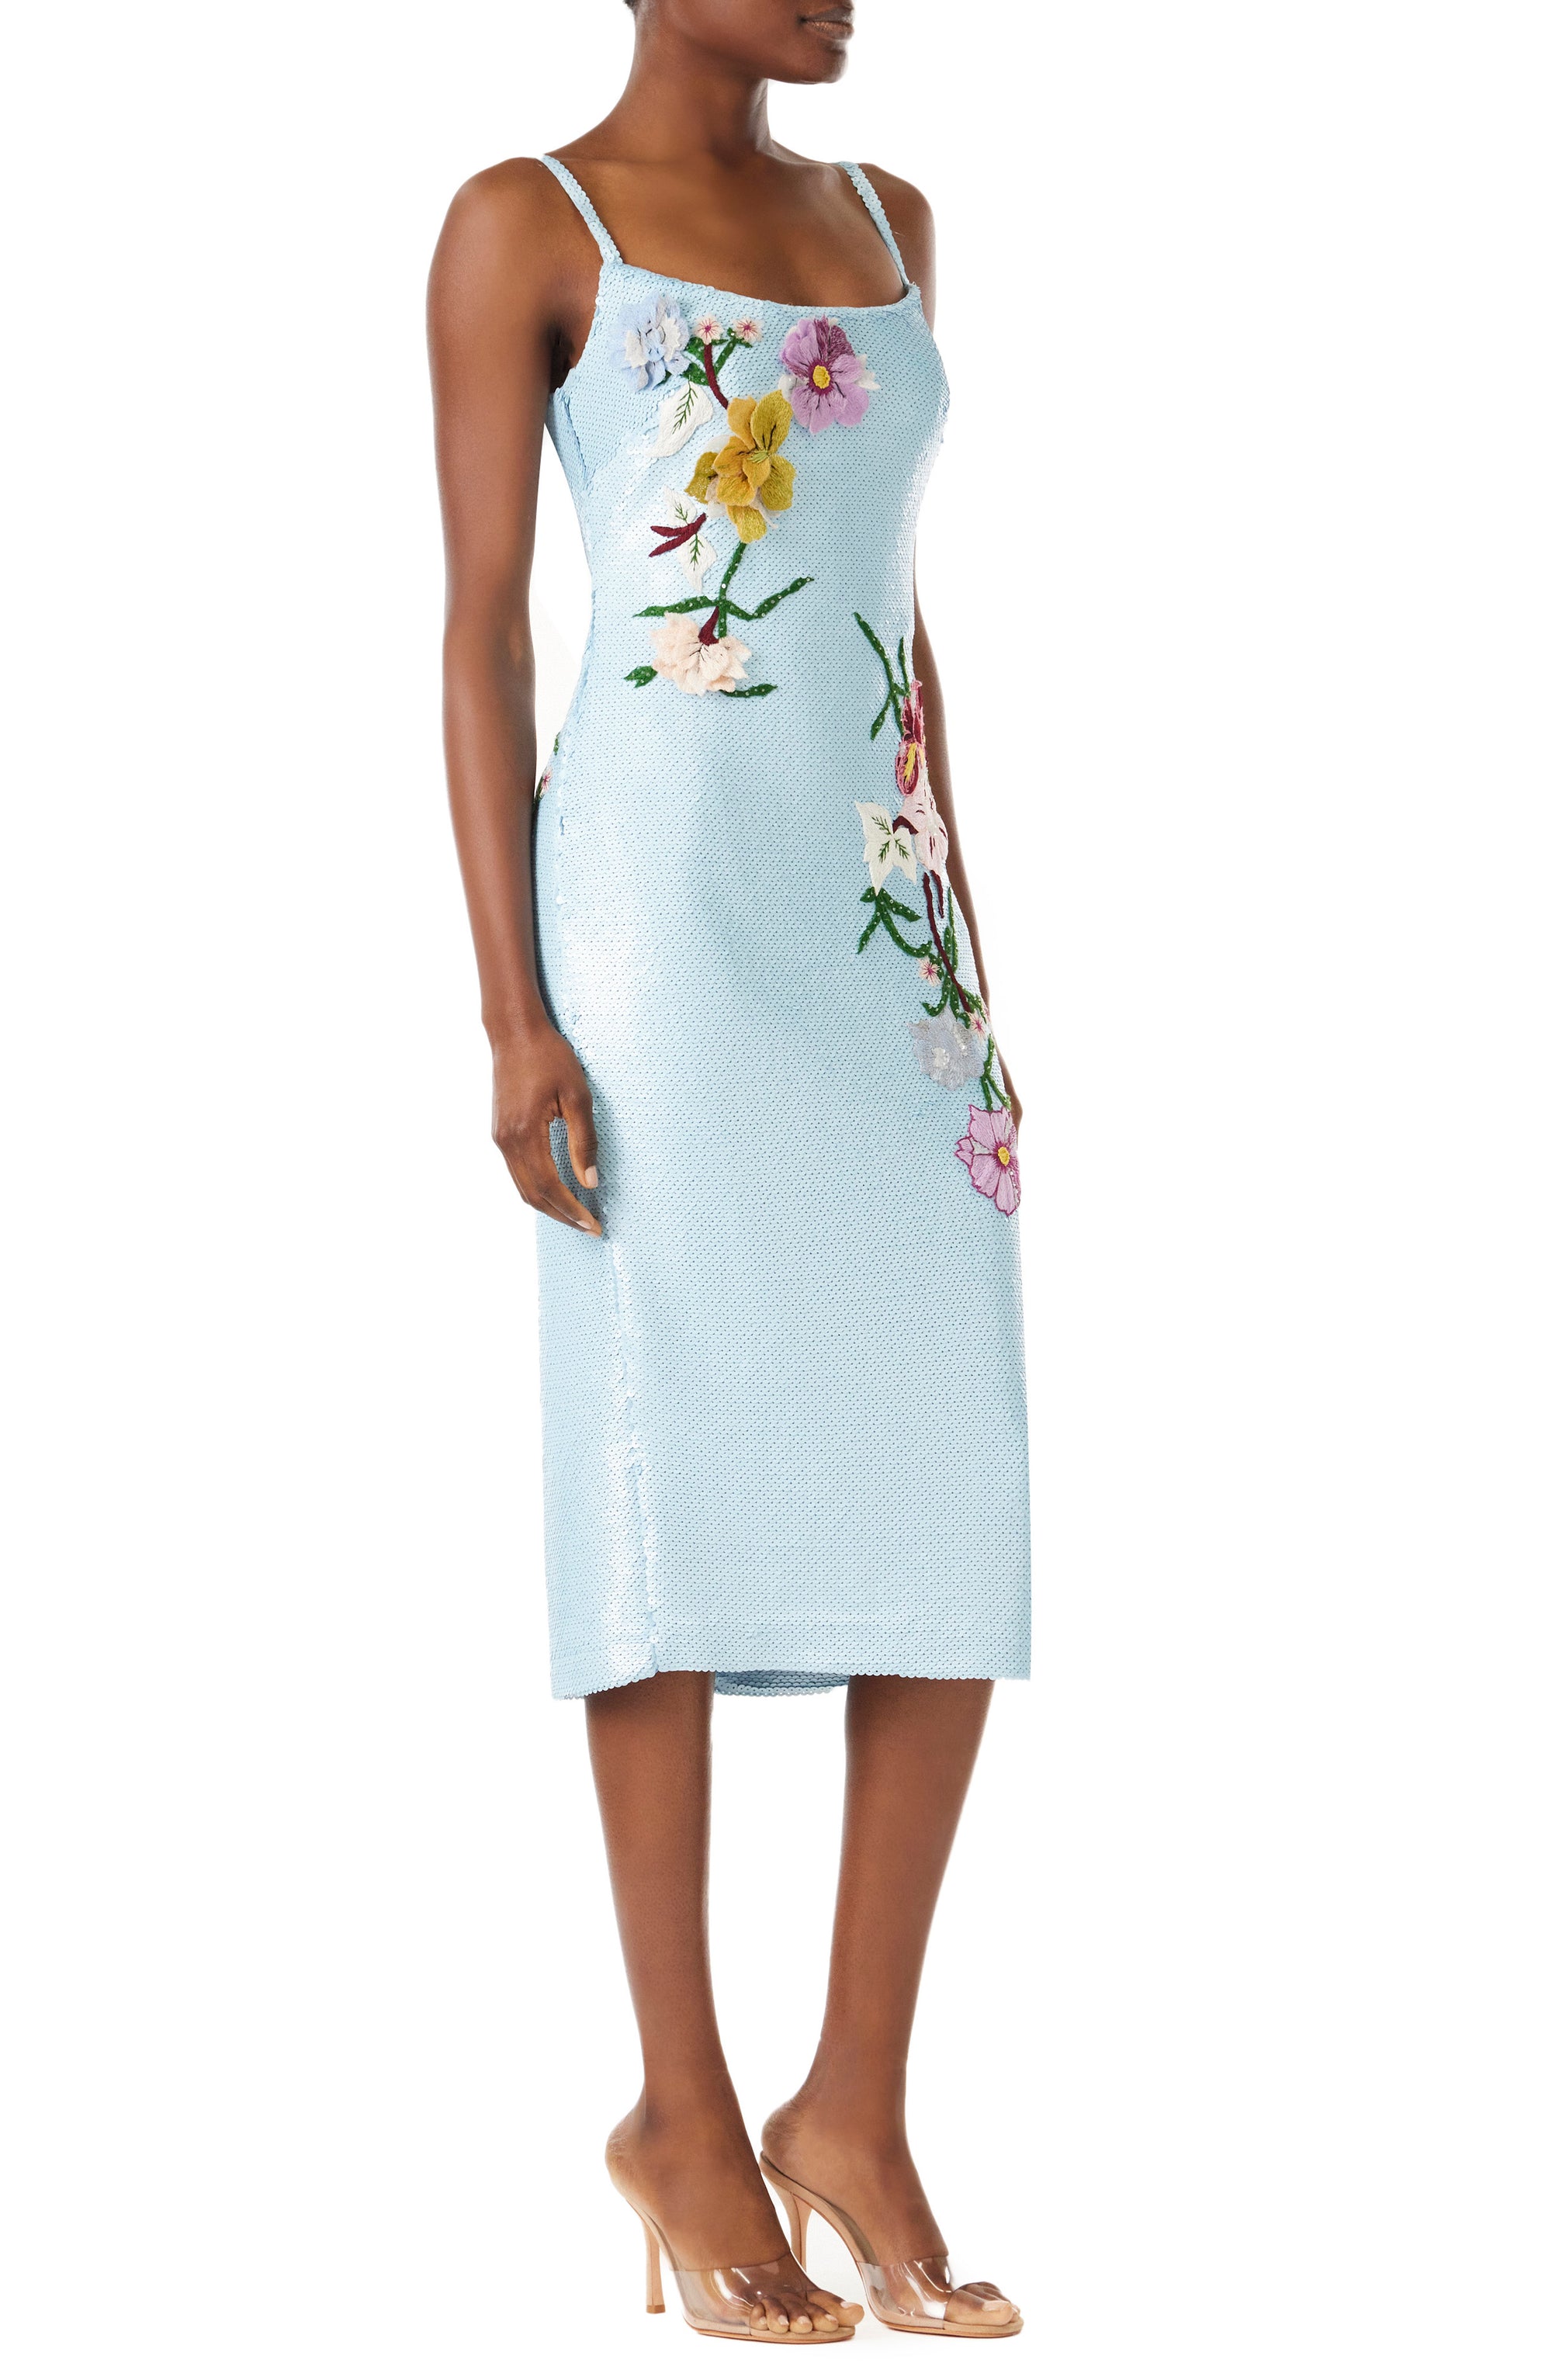 Monique Lhuillier midi-length sky blue sequin dress with spaghetti straps and floral embroidery.